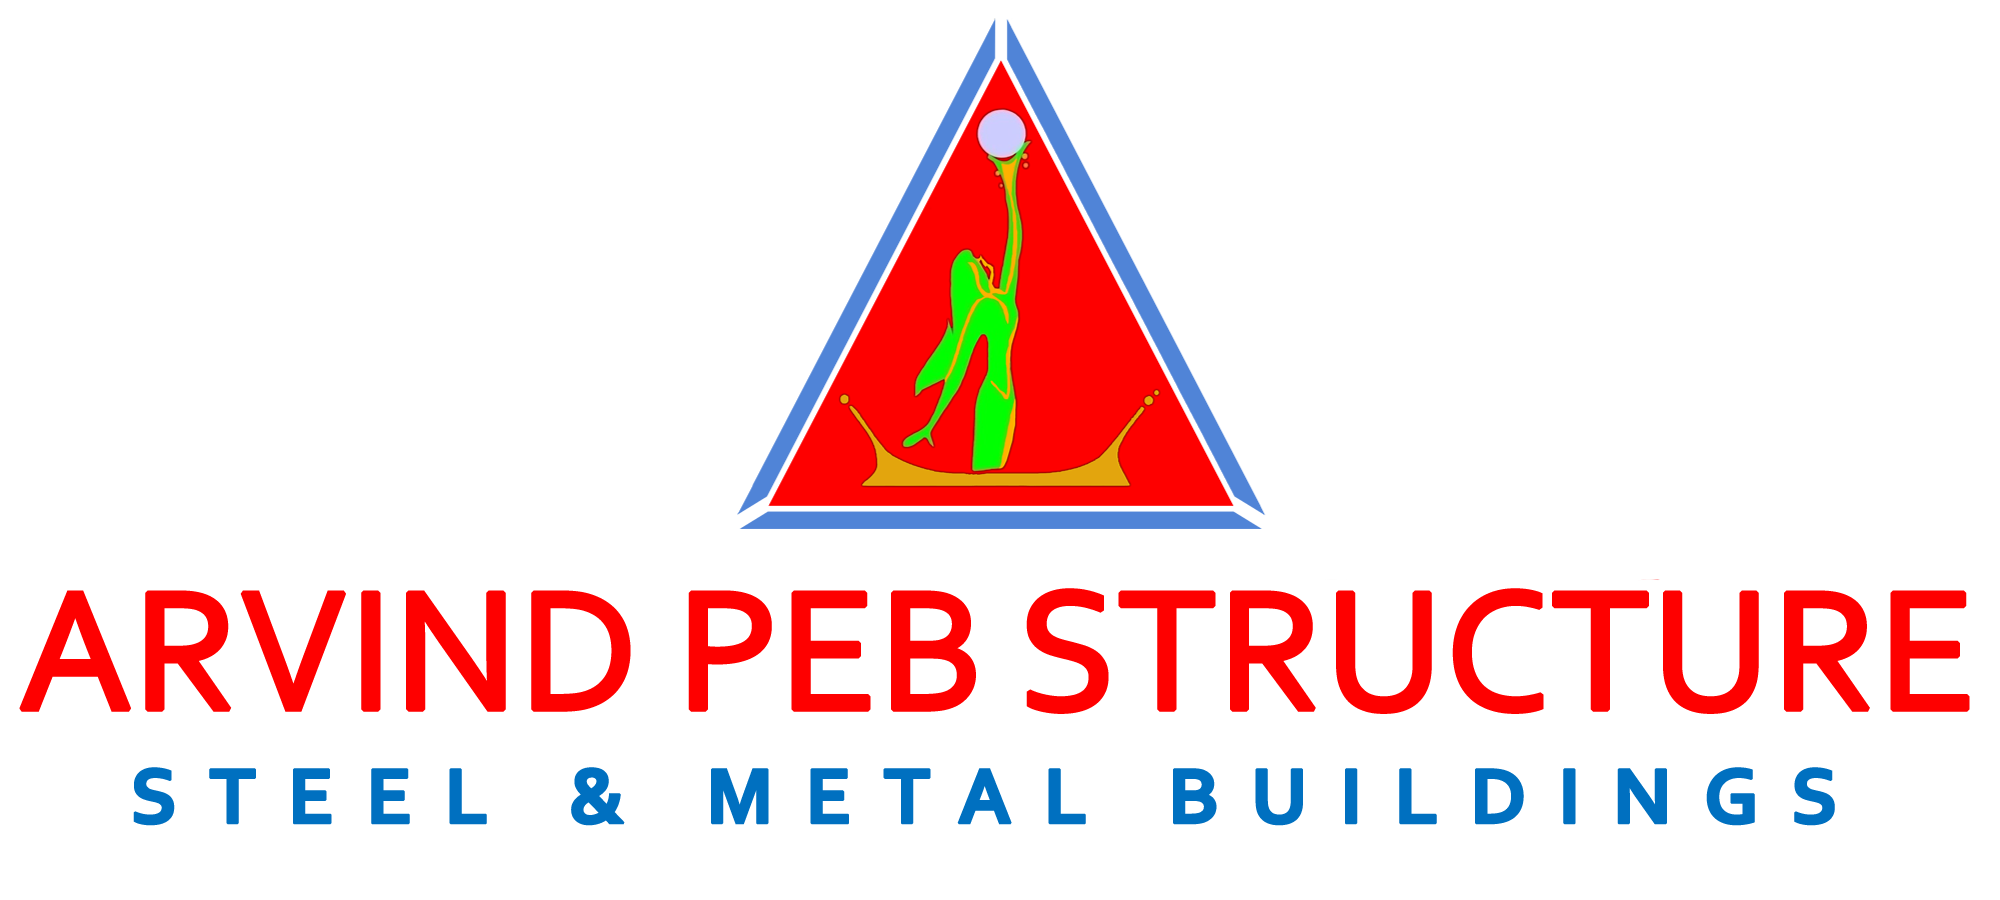 Peb structural shed